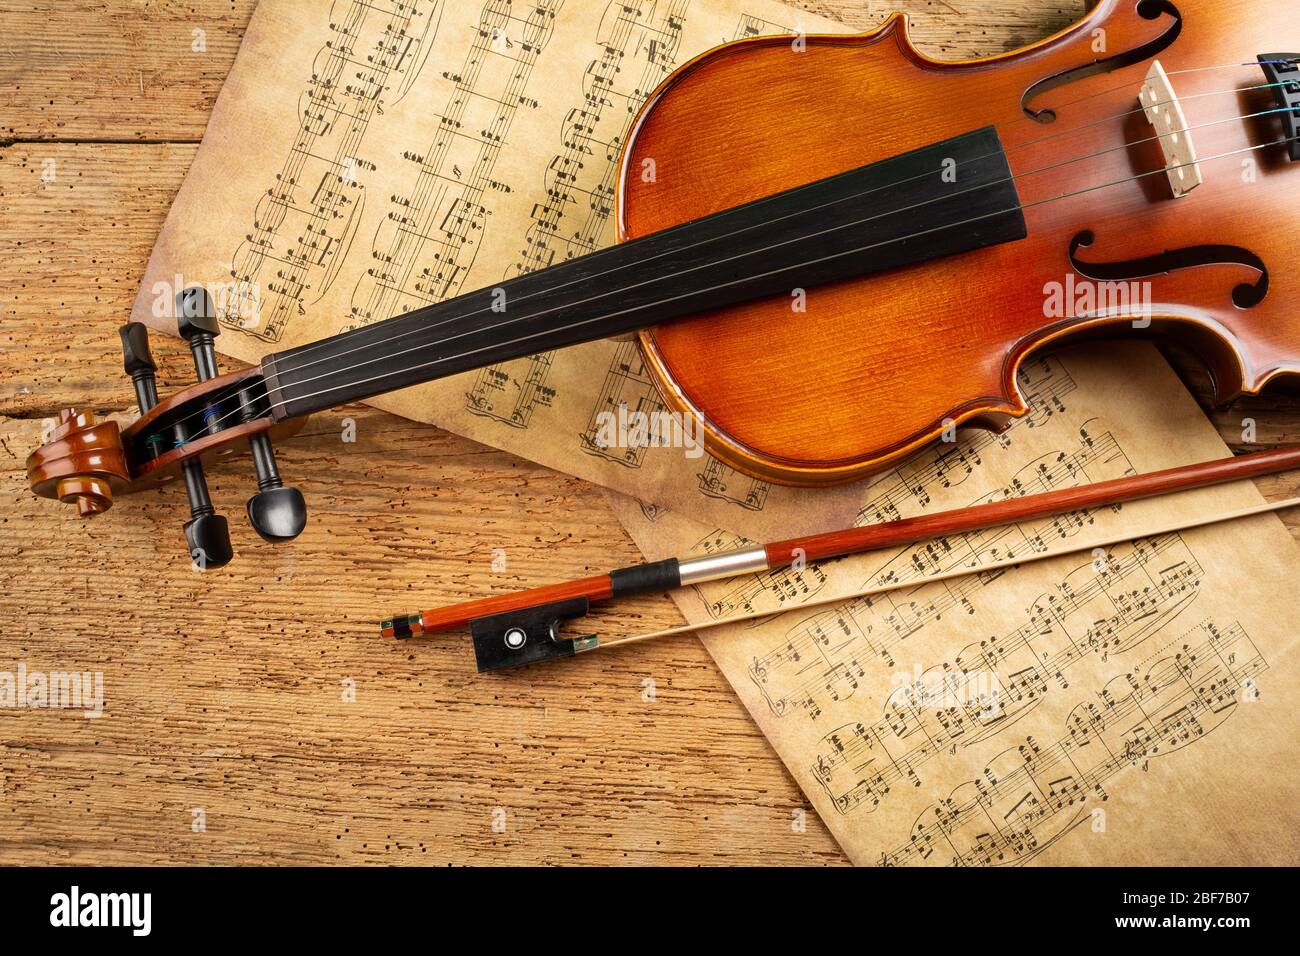 classic retro violin music string instrumt with old music note sheet paper on old oak wood wooden background. classical musical romantic valentines da Stock Photo